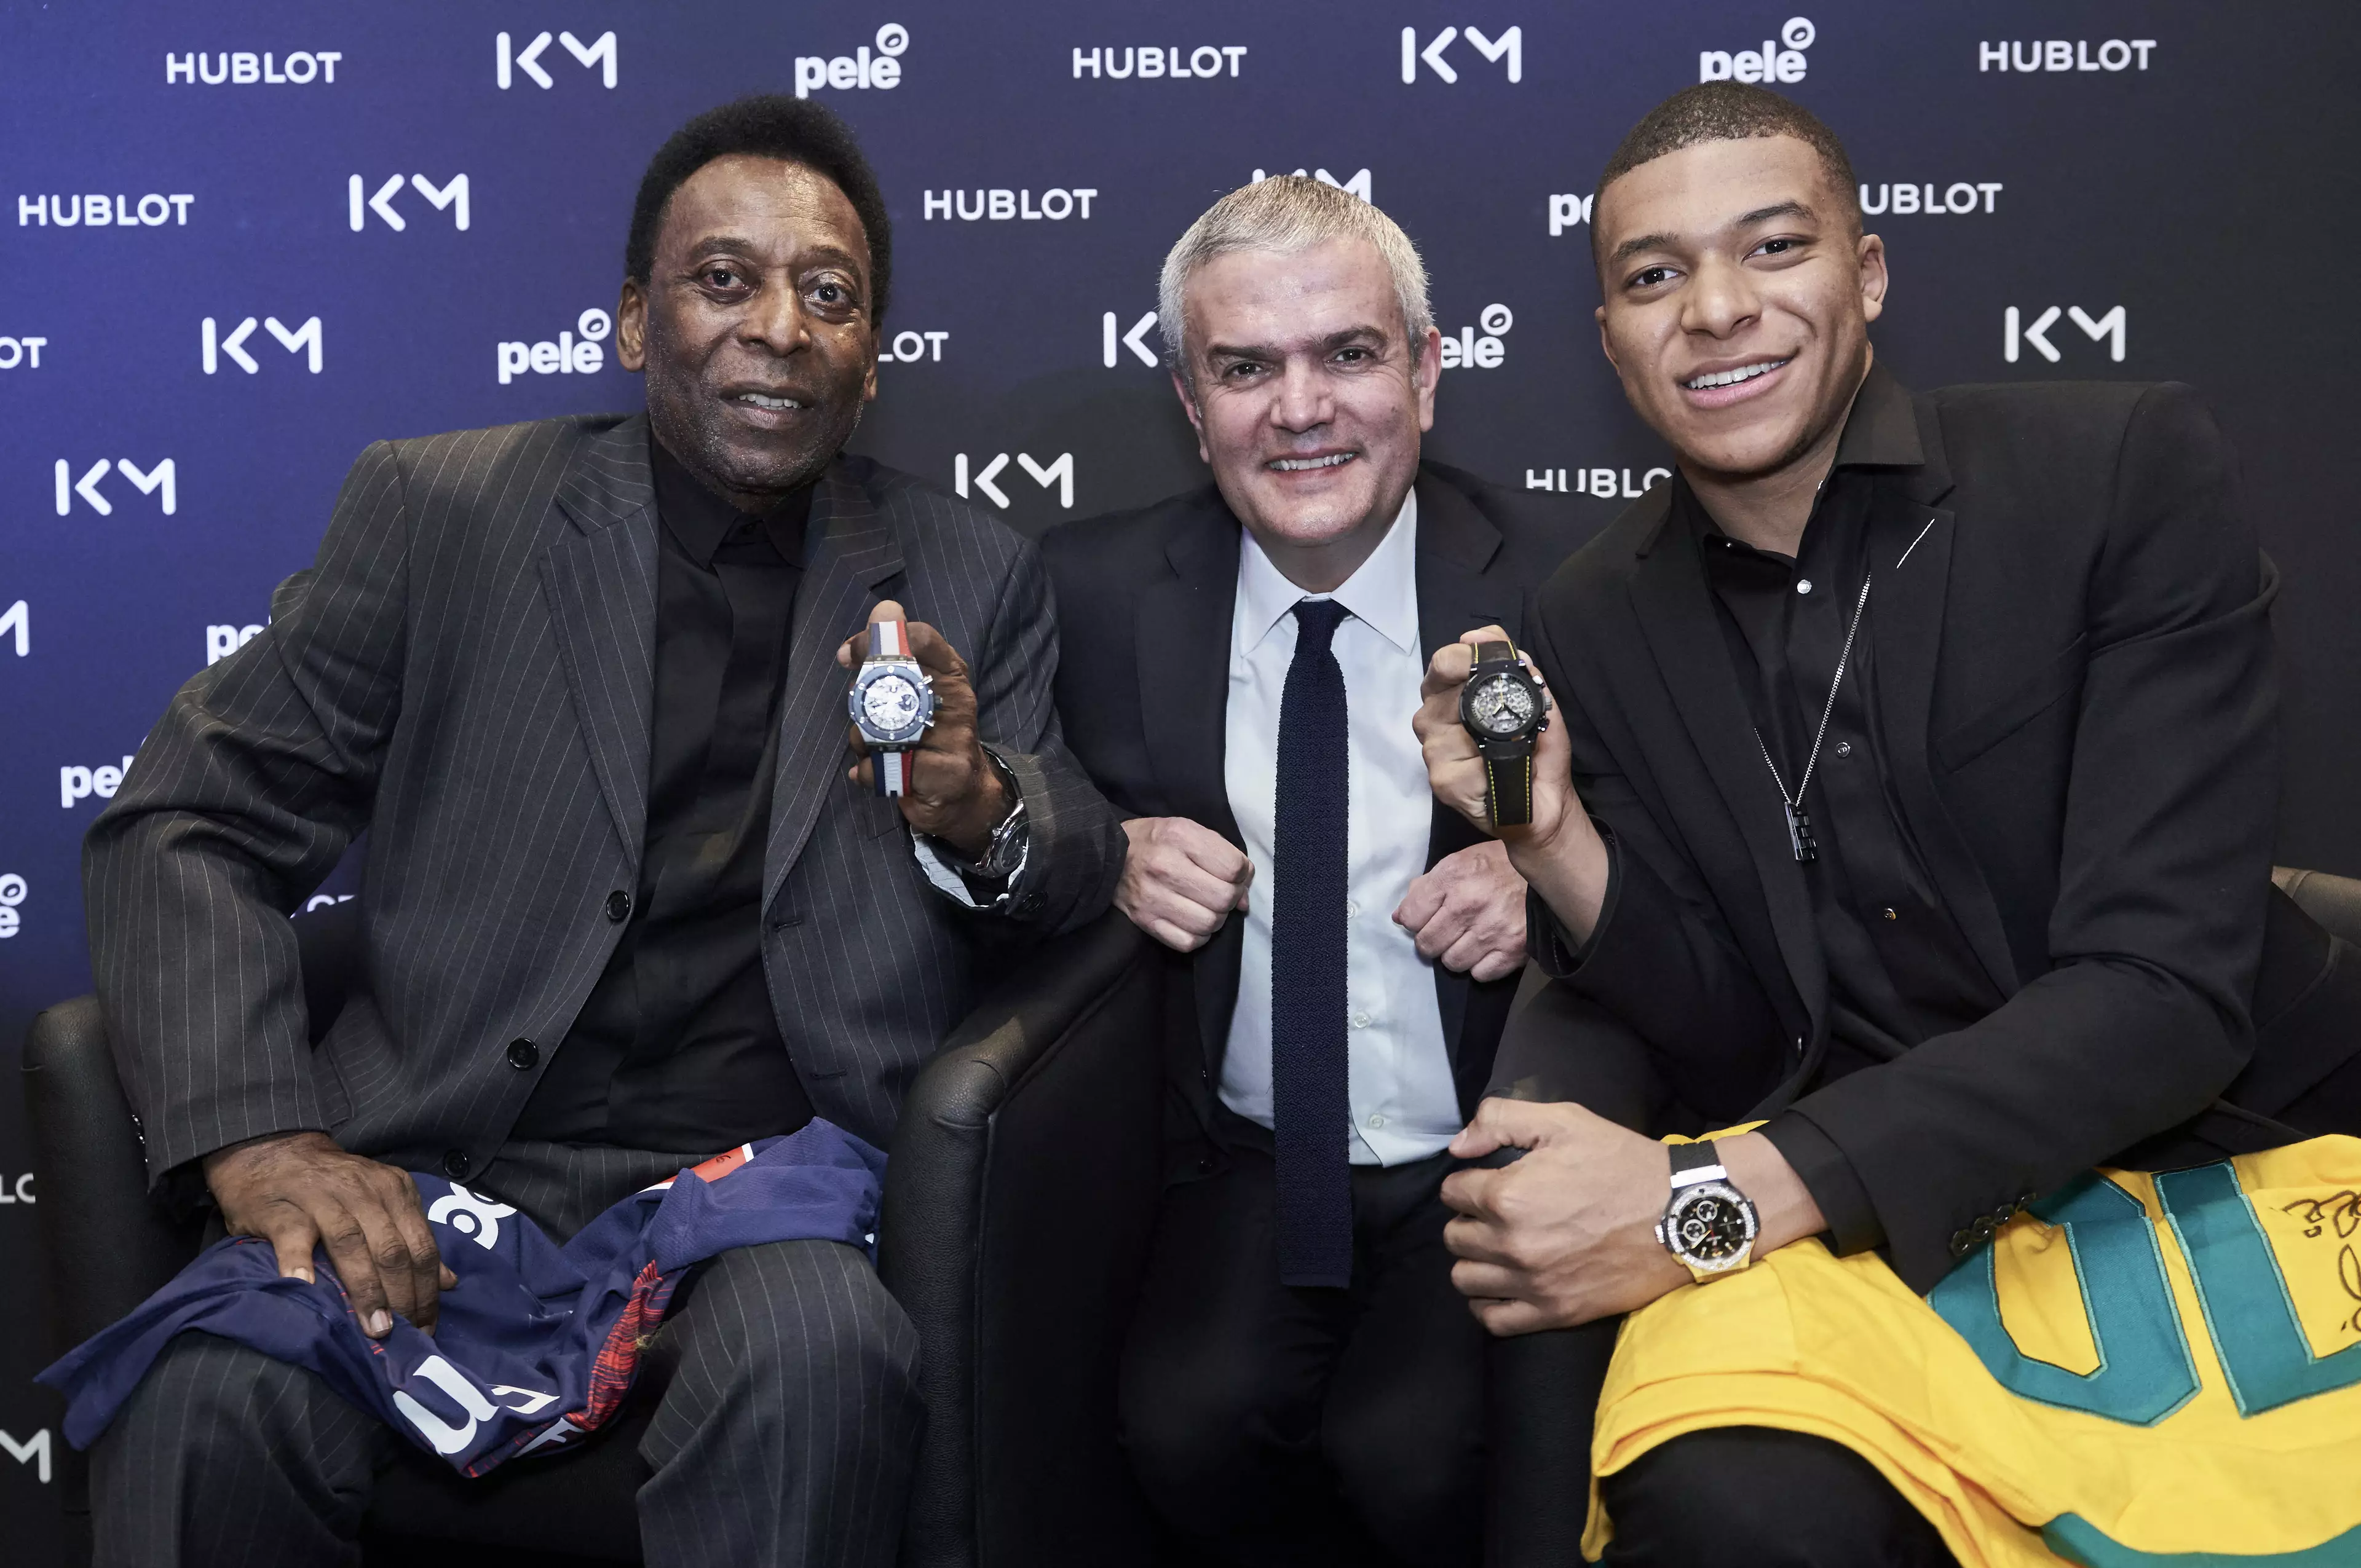 Pele during a public appearance with Kylian Mbappe in 2019. (Image